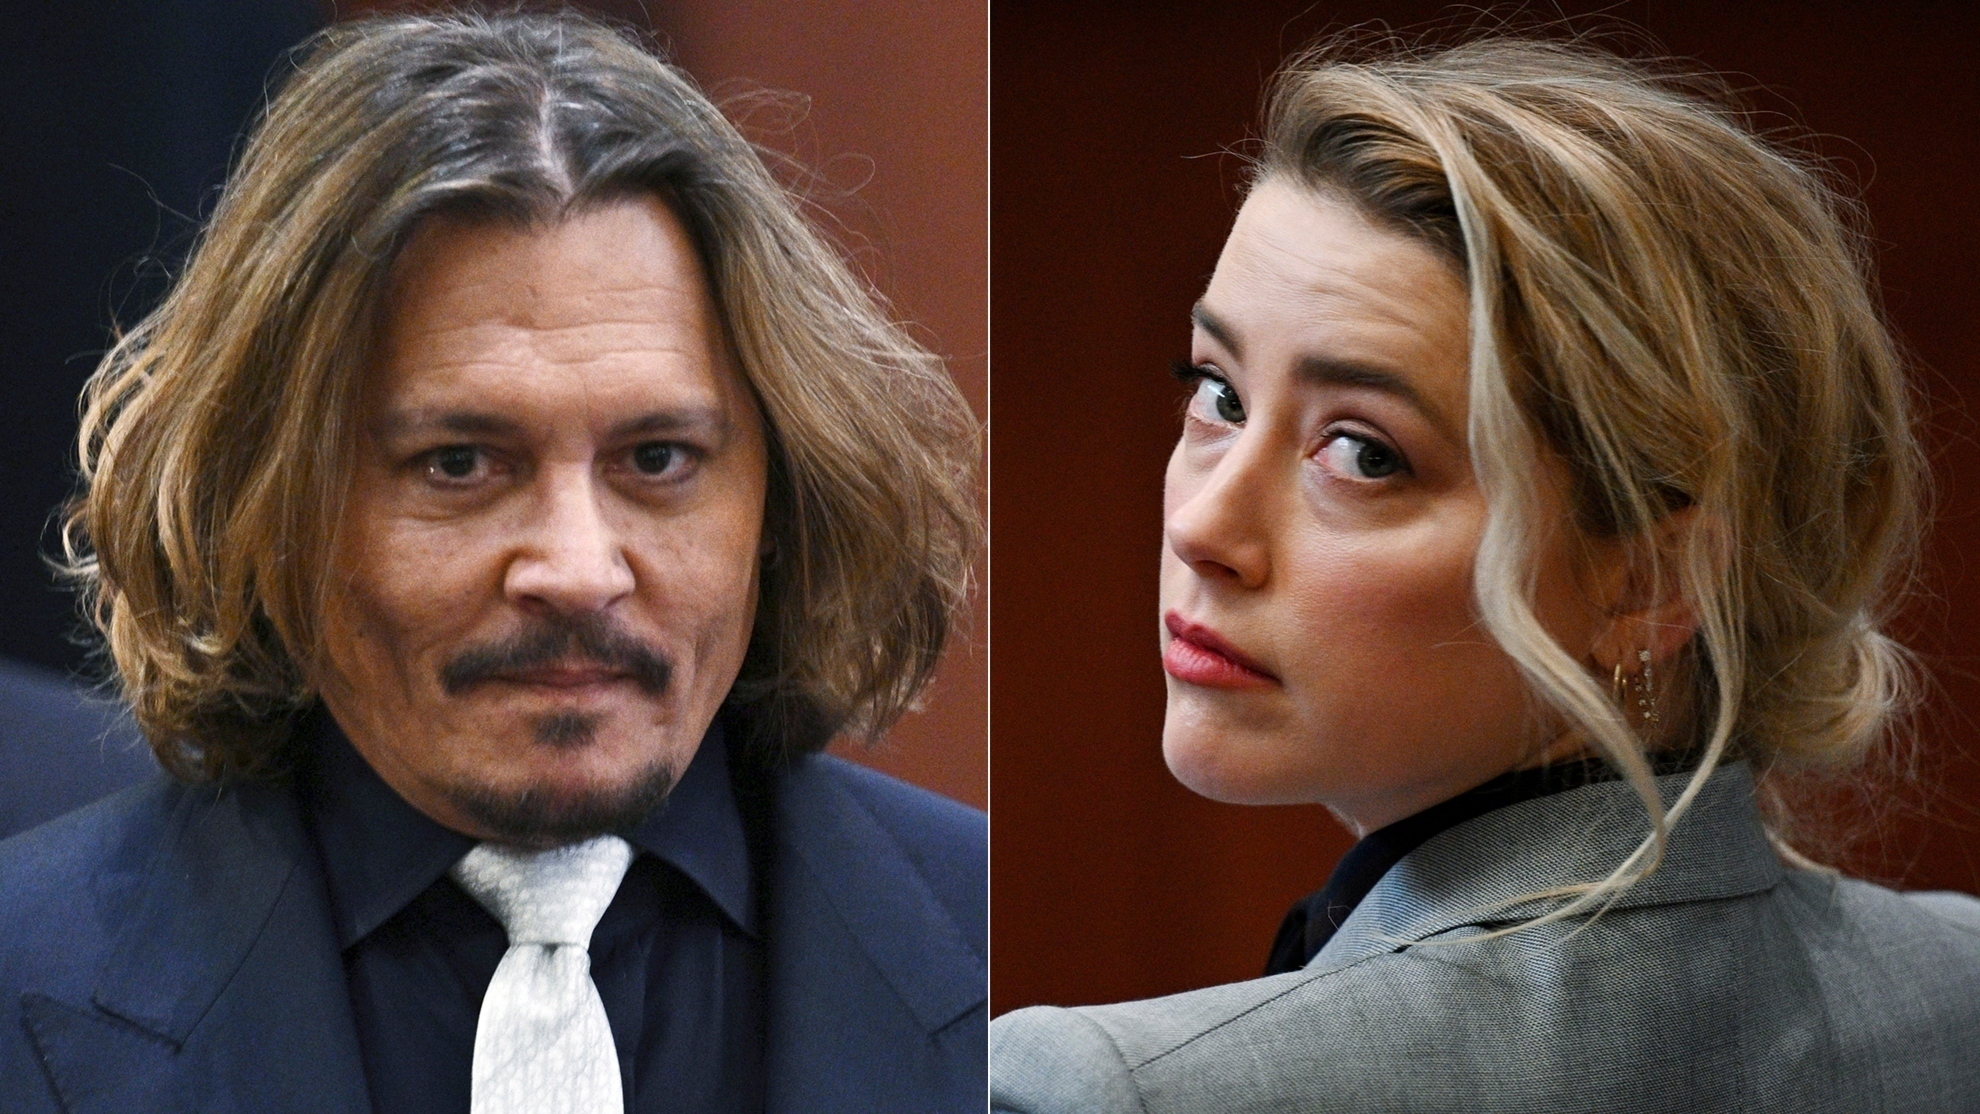 Johnny Depp trial LIVE: Latest news from defamation battle with Amber Heard